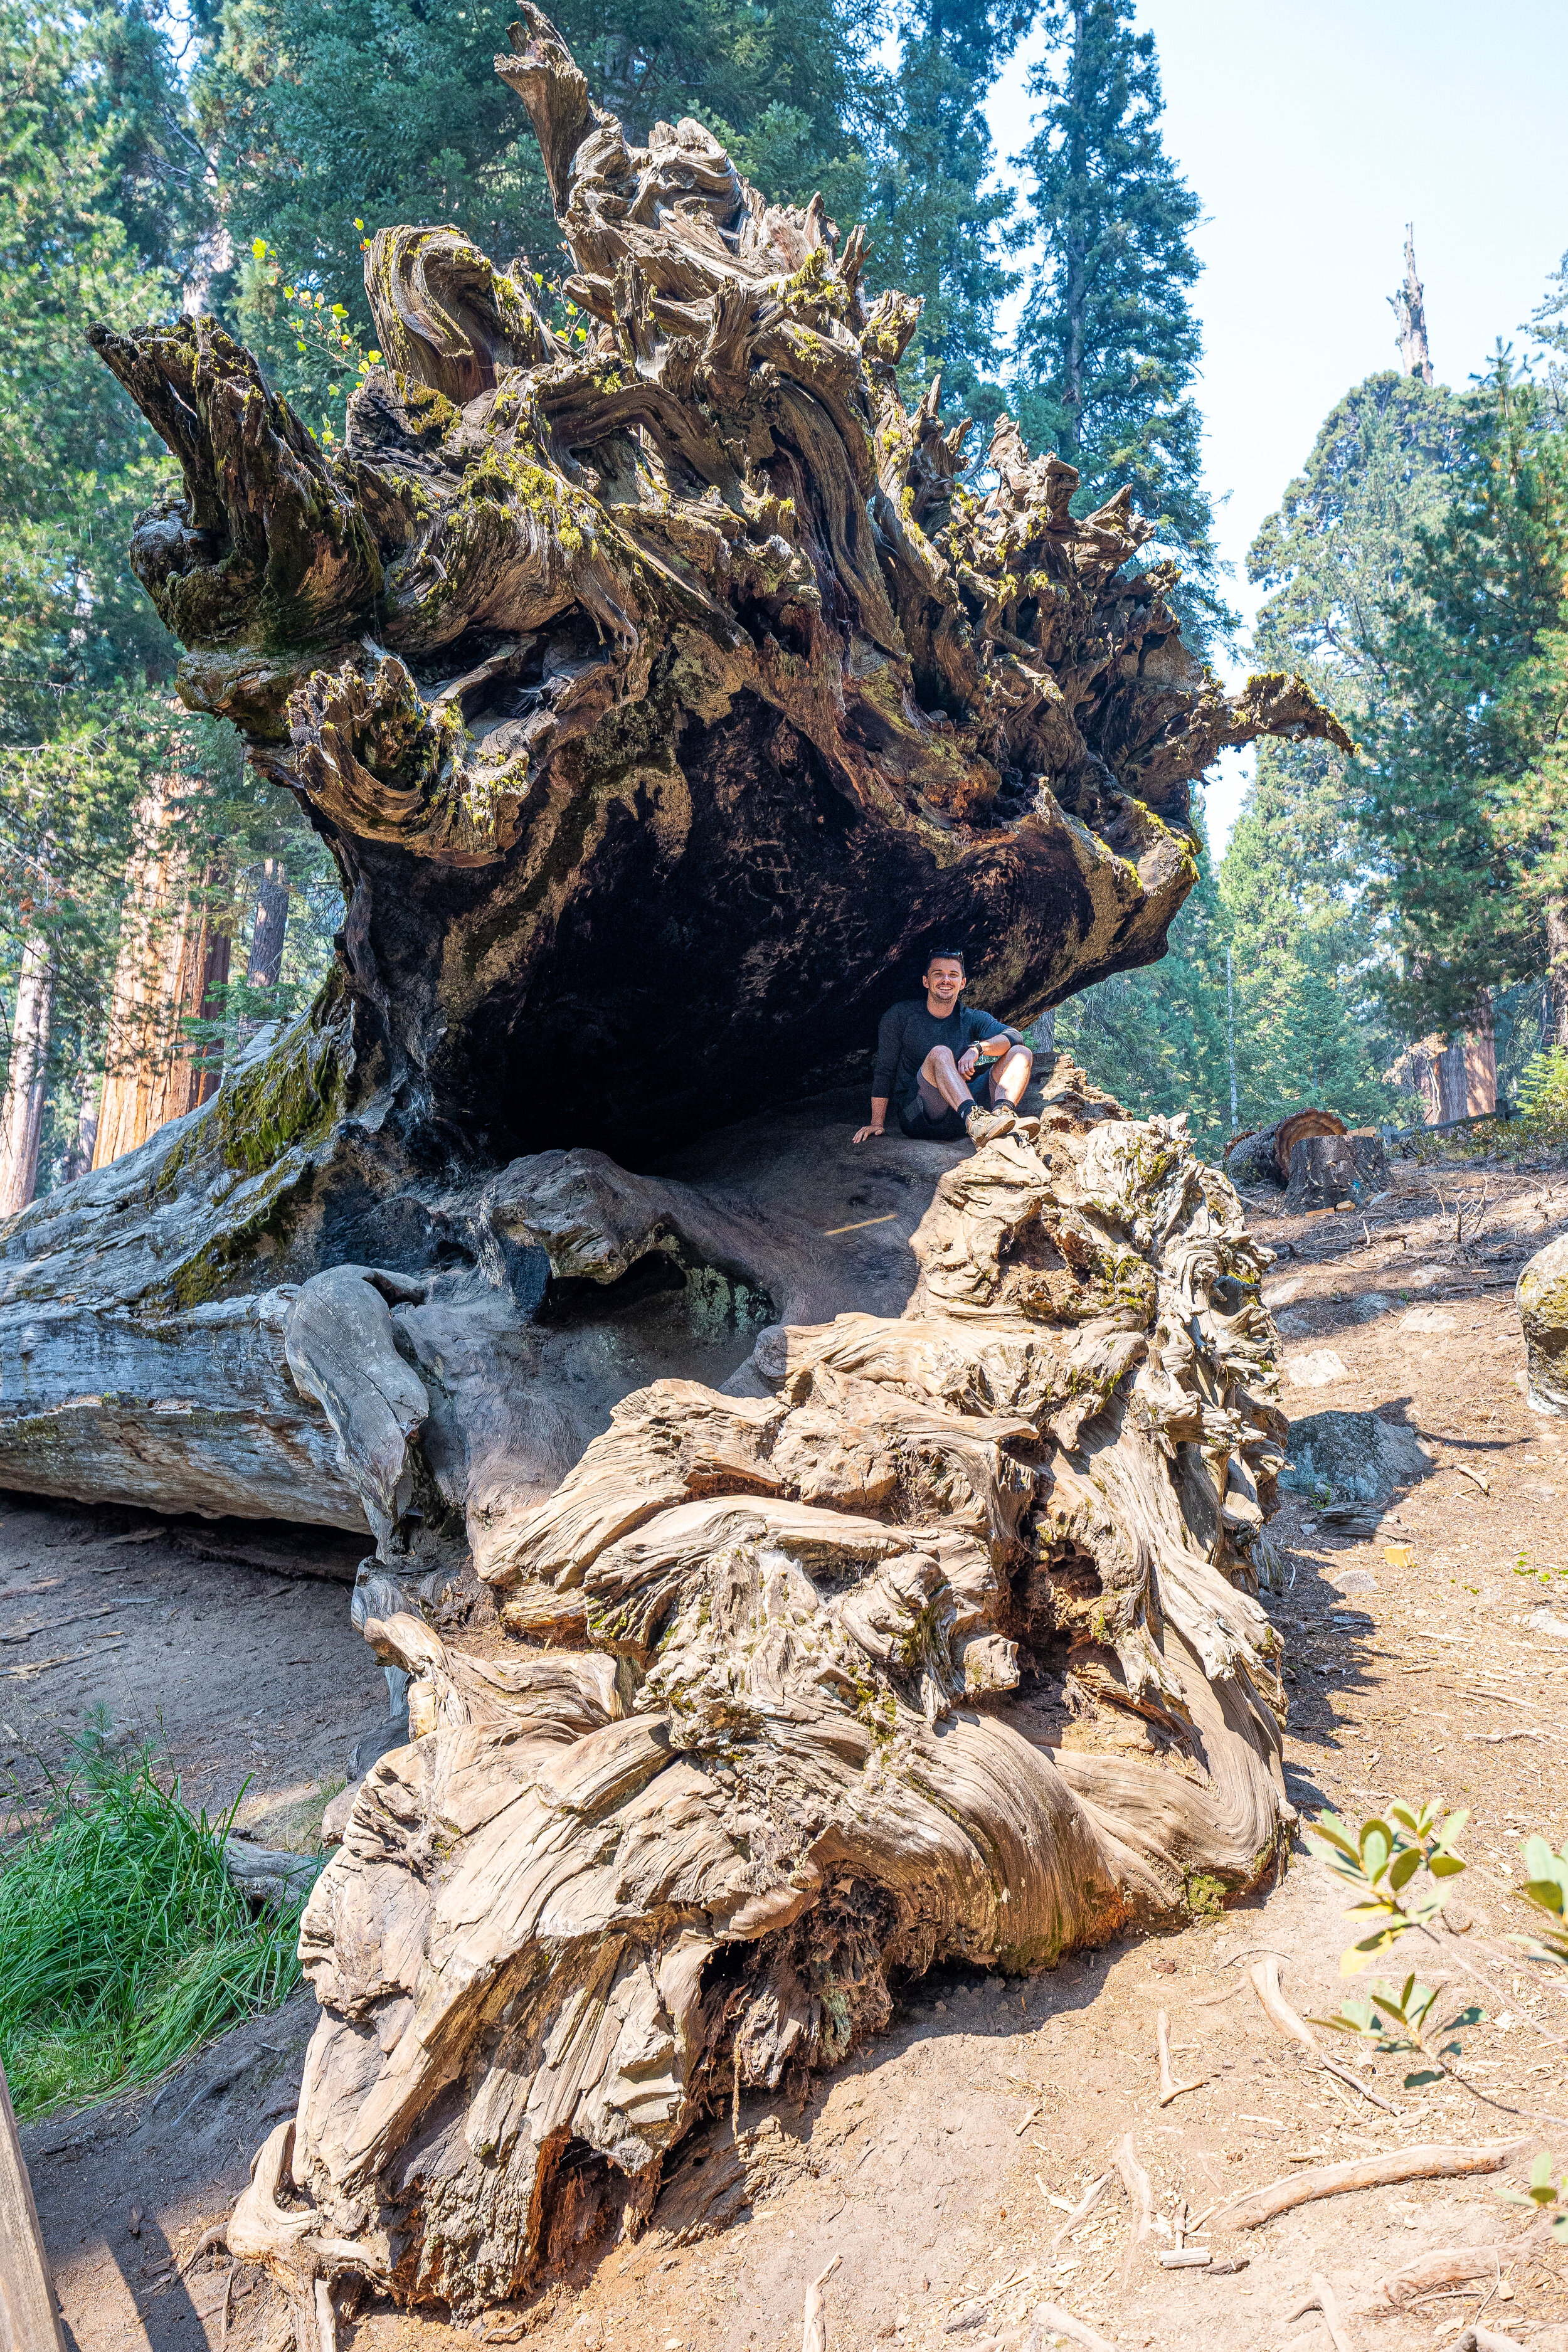  Early pioneers told folks on the east coast about the giant trees in California, but no one believed them. At least three nearby sequoias died just to prove they lived. Cut into pieces, they were shipped across the country to exhibit as freaks. Some